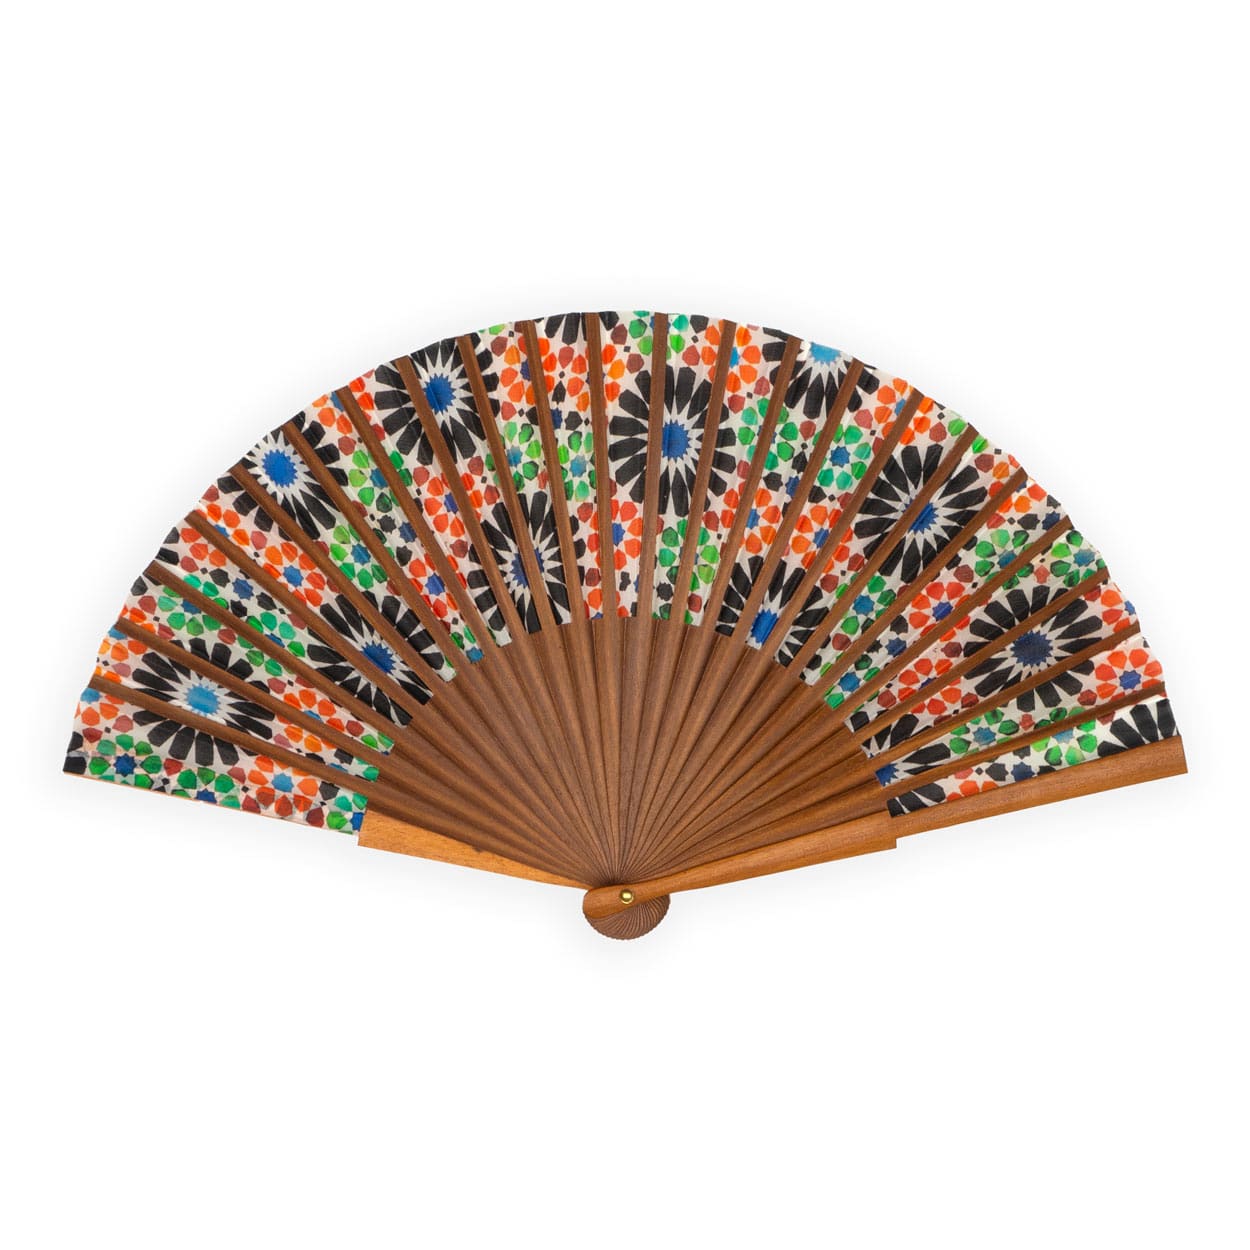 Colorful hand fan inspired by Islamic Art